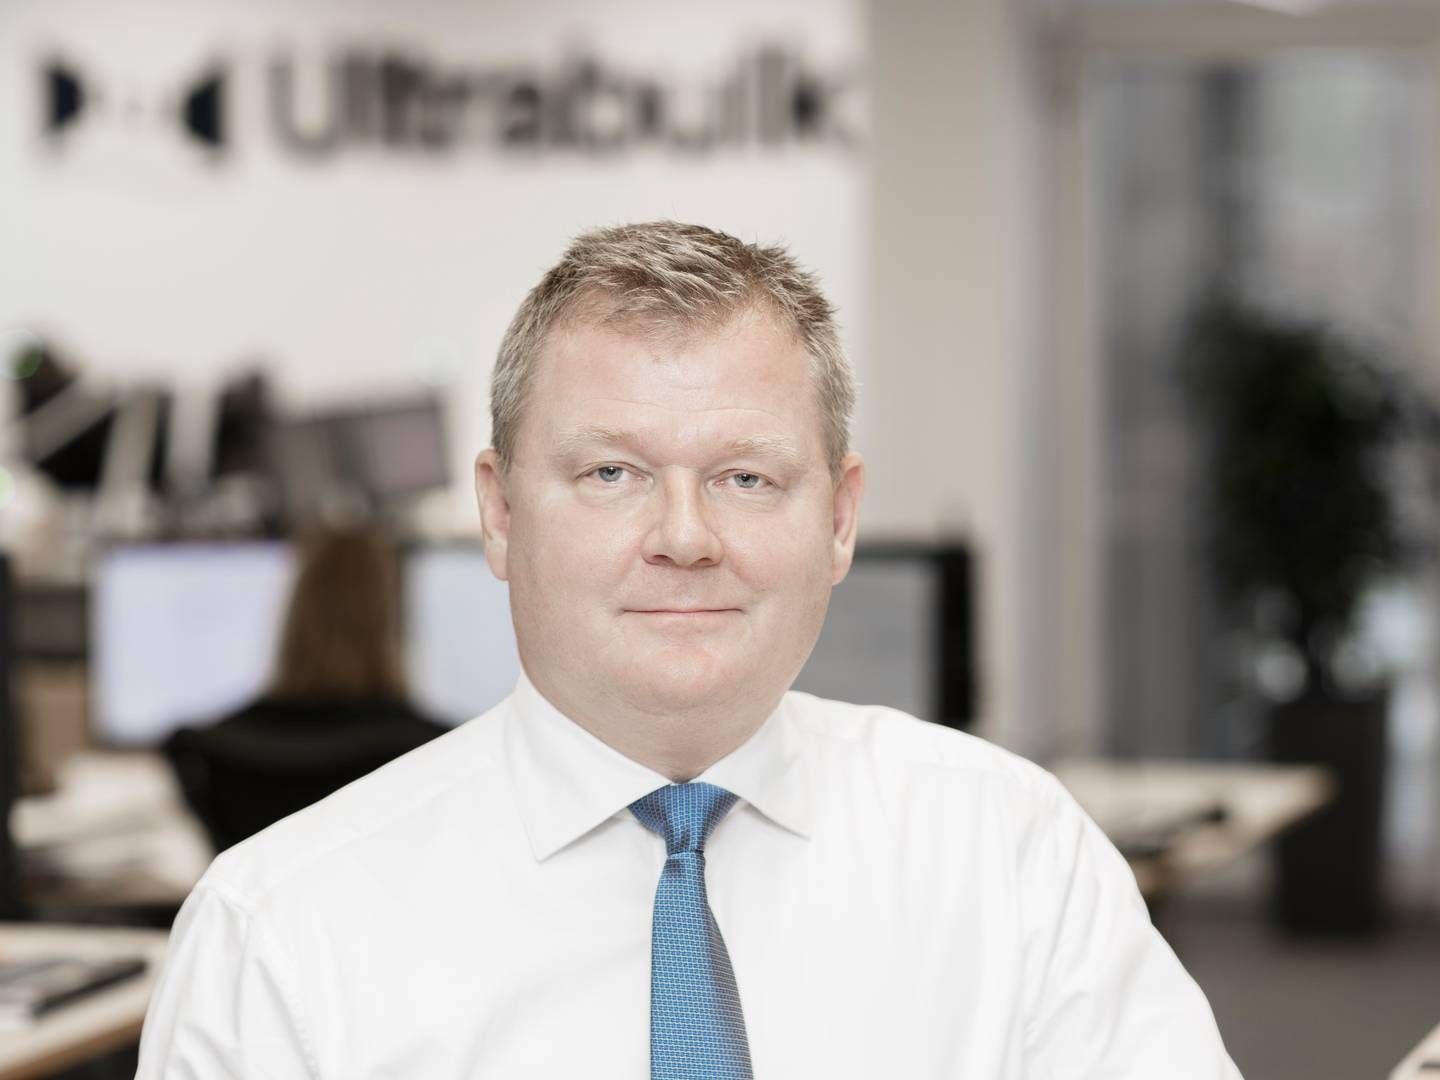 The dry bulk earnings upswing is easing off, but Ultrabulk is optimistic following China's reopening, says CEO Hans-Christian Olesen | Photo: Ultrabulk